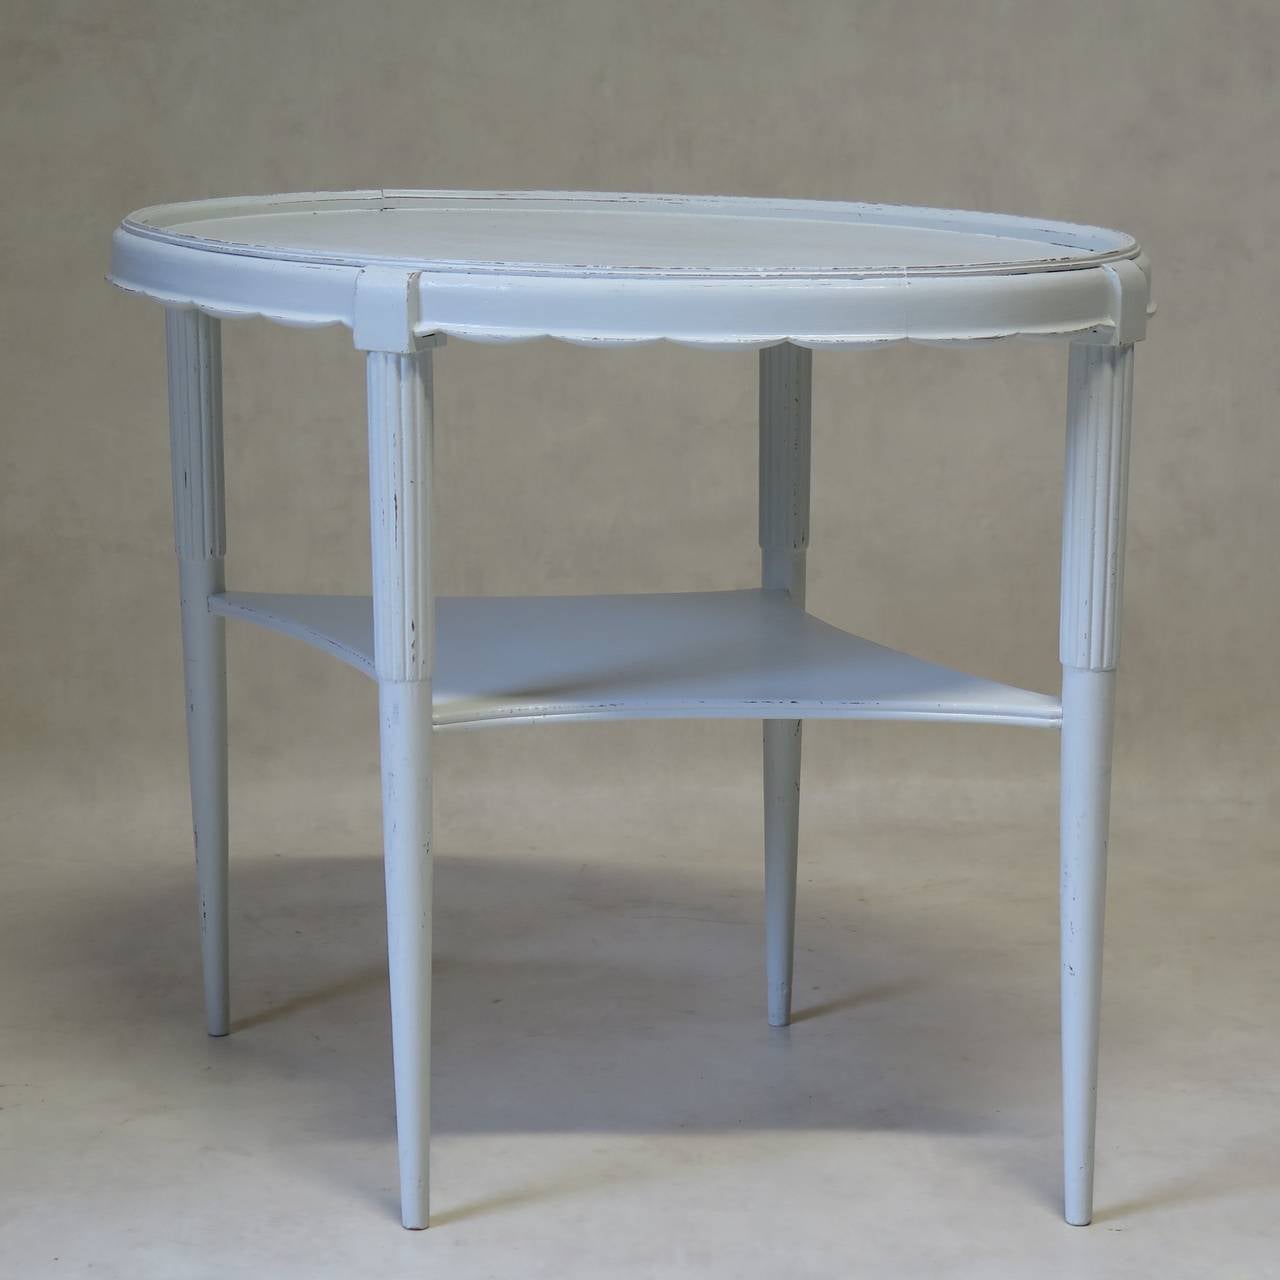 Elegant oval side table with a scalloped apron and reeded and tapering legs. Painted glossy white.